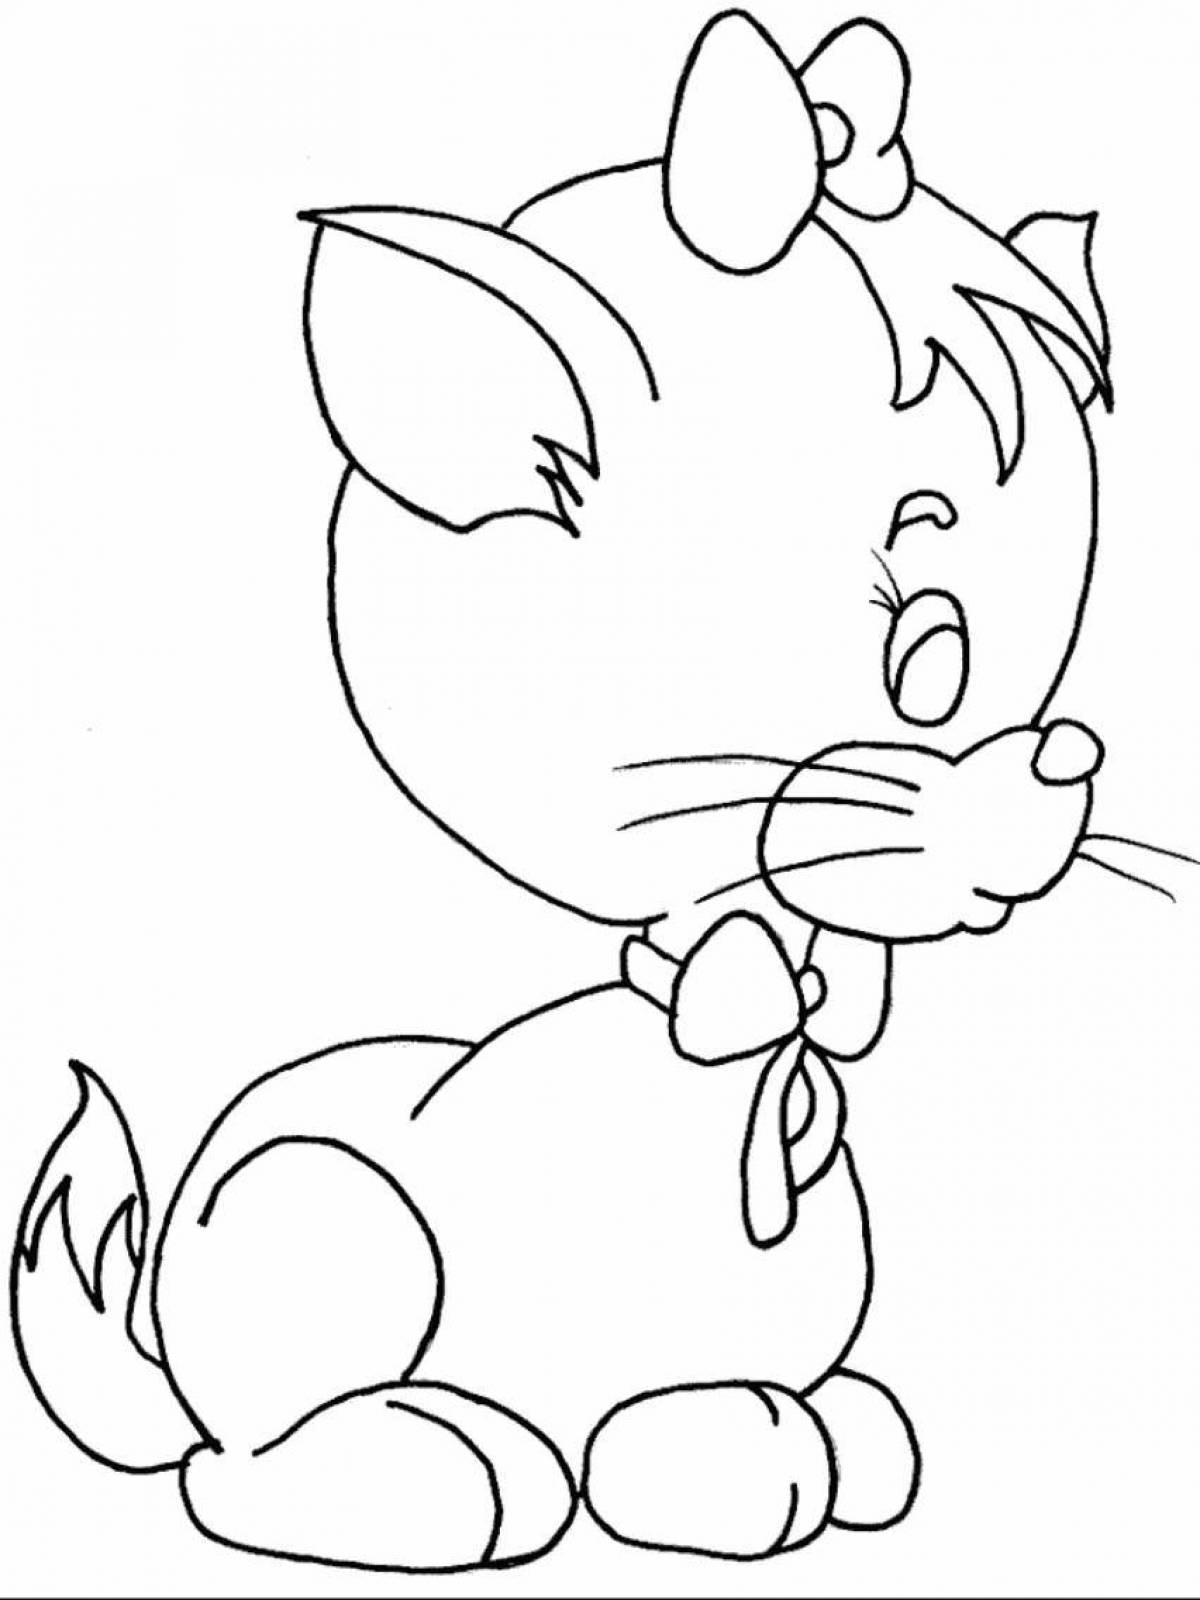 Playful kitty coloring book for 5-6 year olds